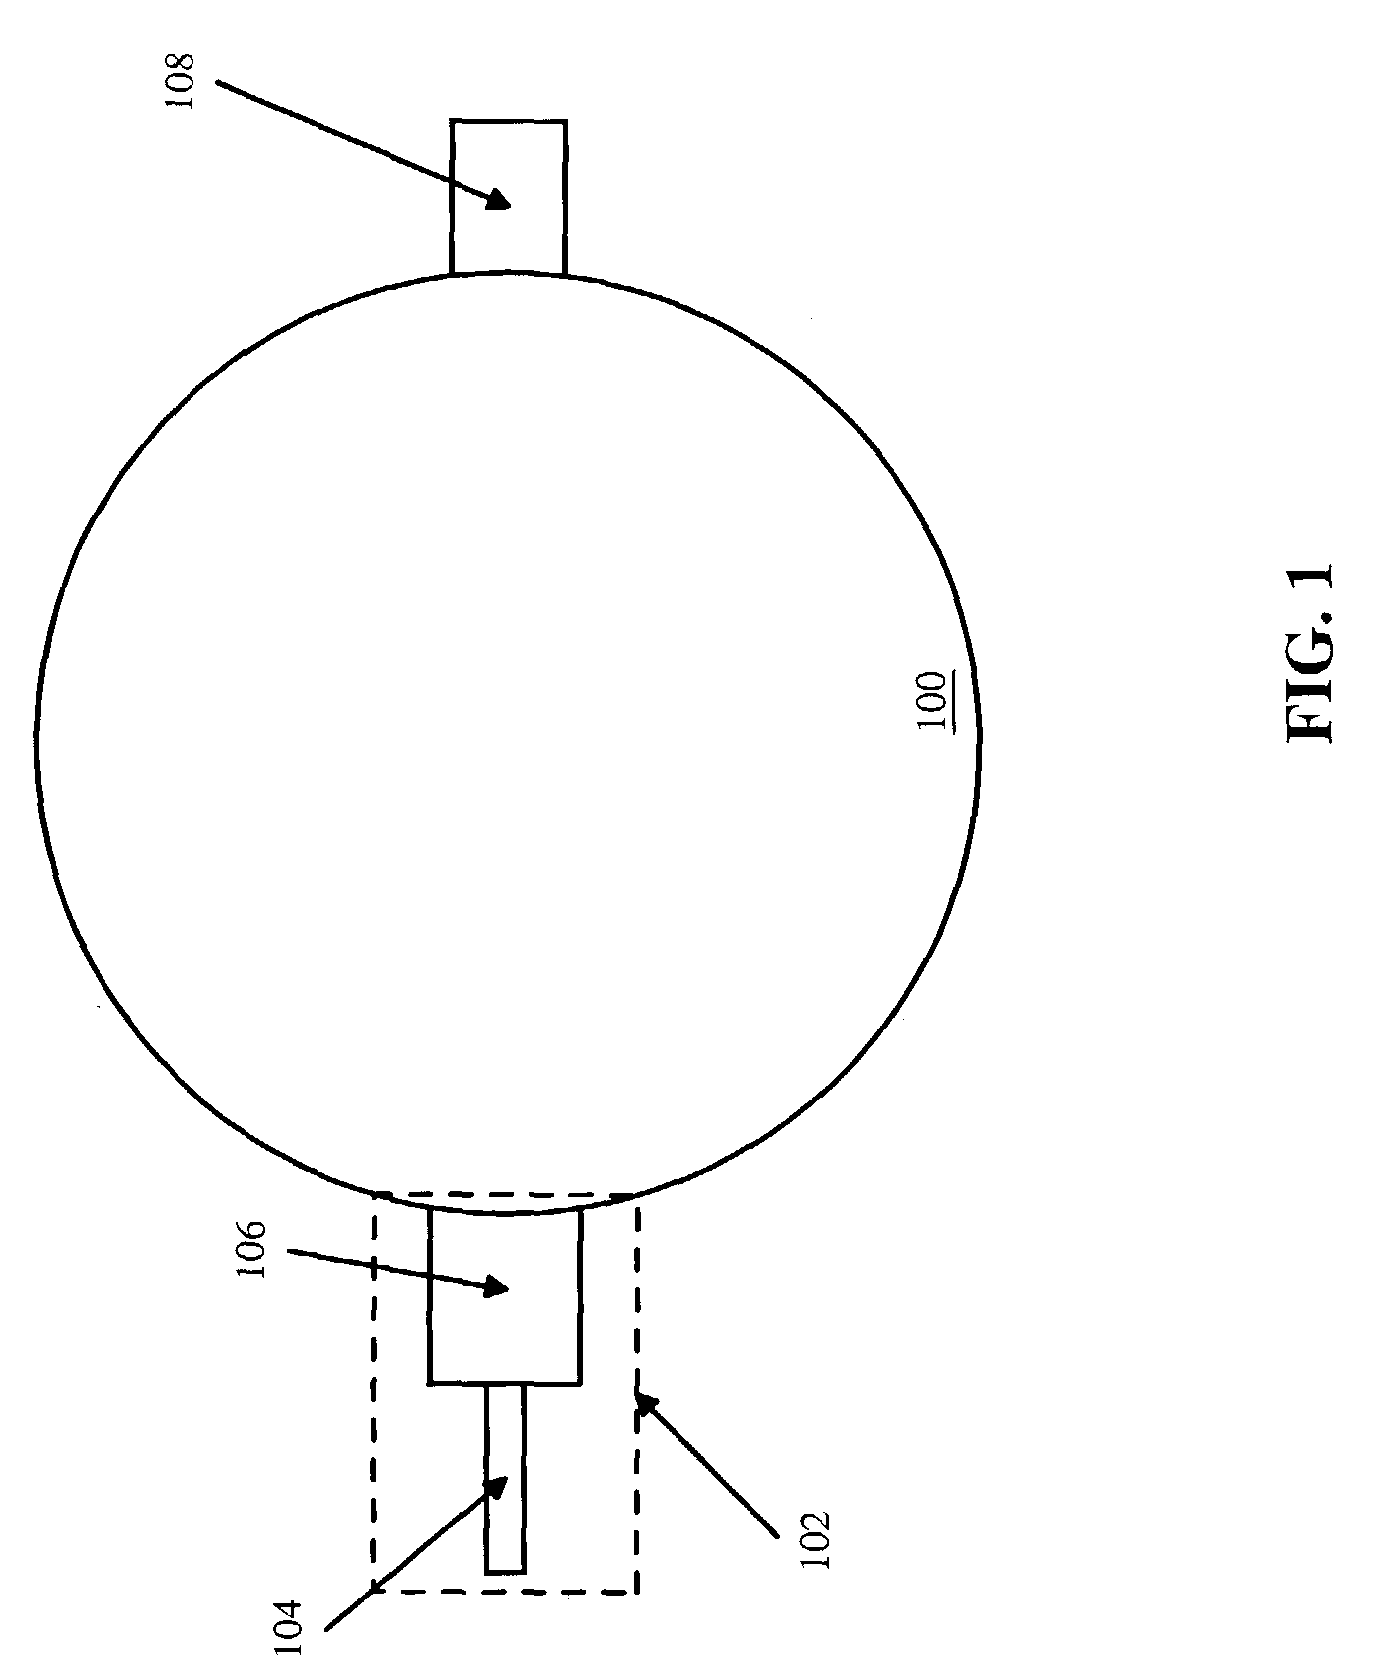 Reaction enhancing gas feed for injecting gas into a plasma chamber